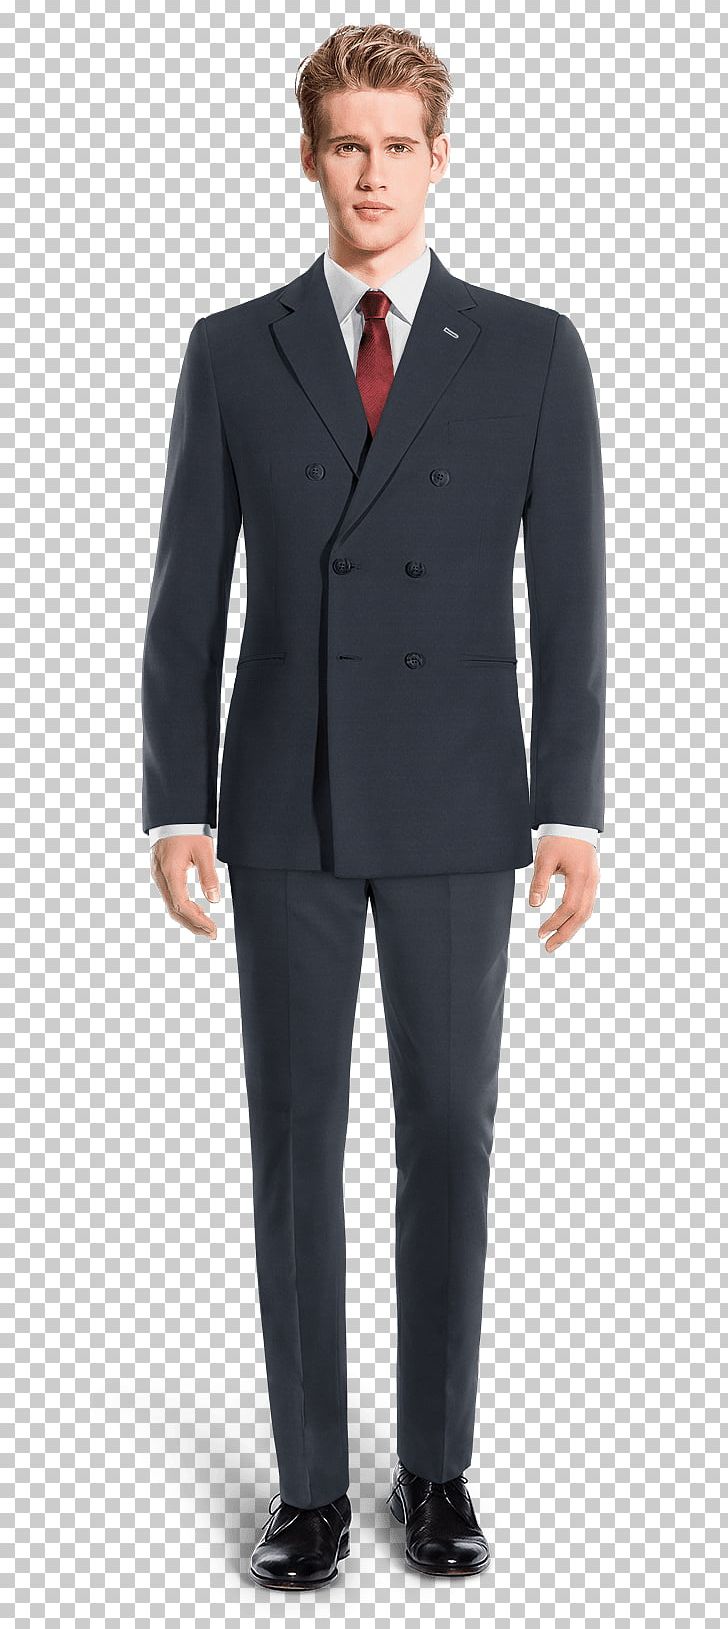 Suit Waistcoat Tuxedo Navy Blue Single-breasted PNG, Clipart, Blazer, Business, Businessperson, Button, Clothing Free PNG Download